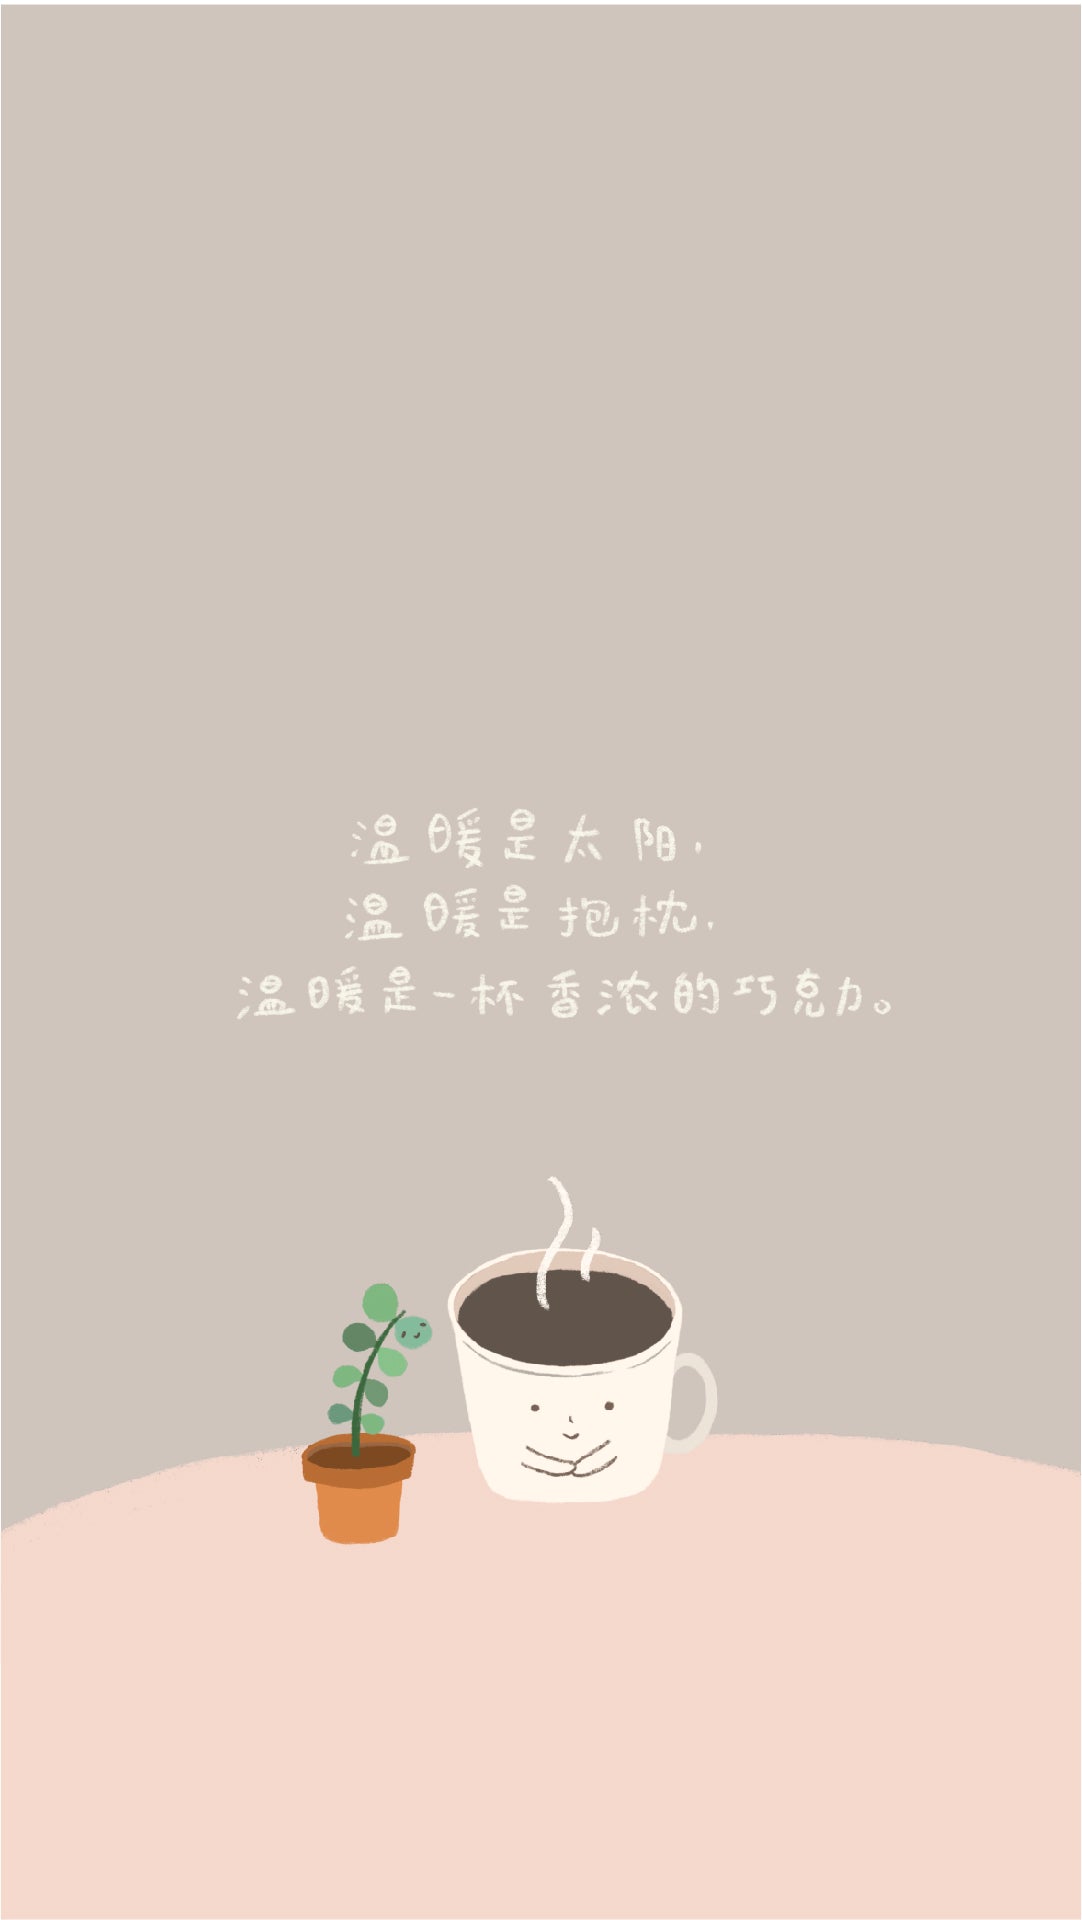 phone wallpaper of a digital illustration of a chinese quote about having peace and warmth in the morning with a cup of hot chocolate